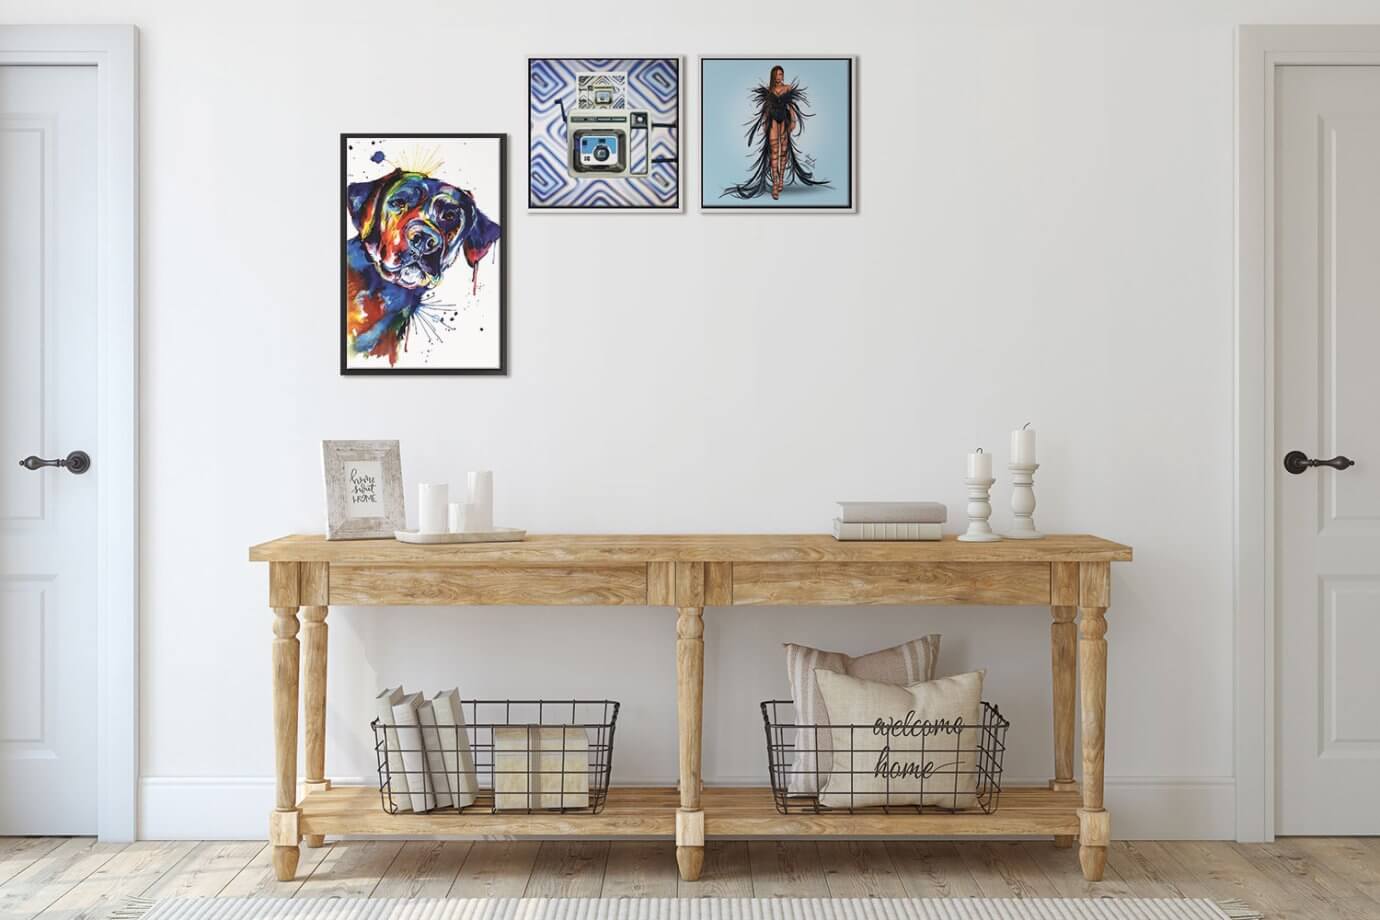 Dog painting, vintage camera art, and beyonce painting above a wood entryway table